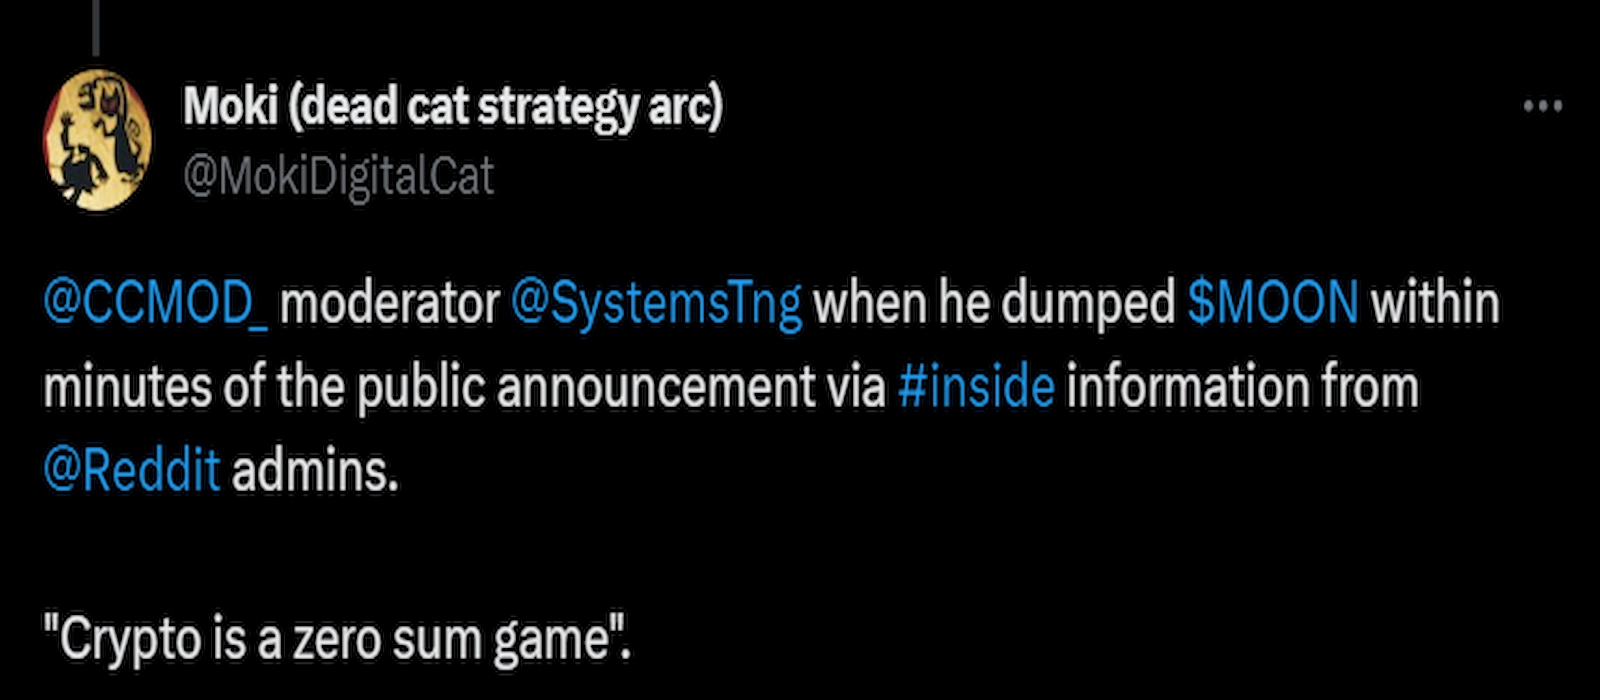 Reddit moderator TNGSystems made a controversial statement.